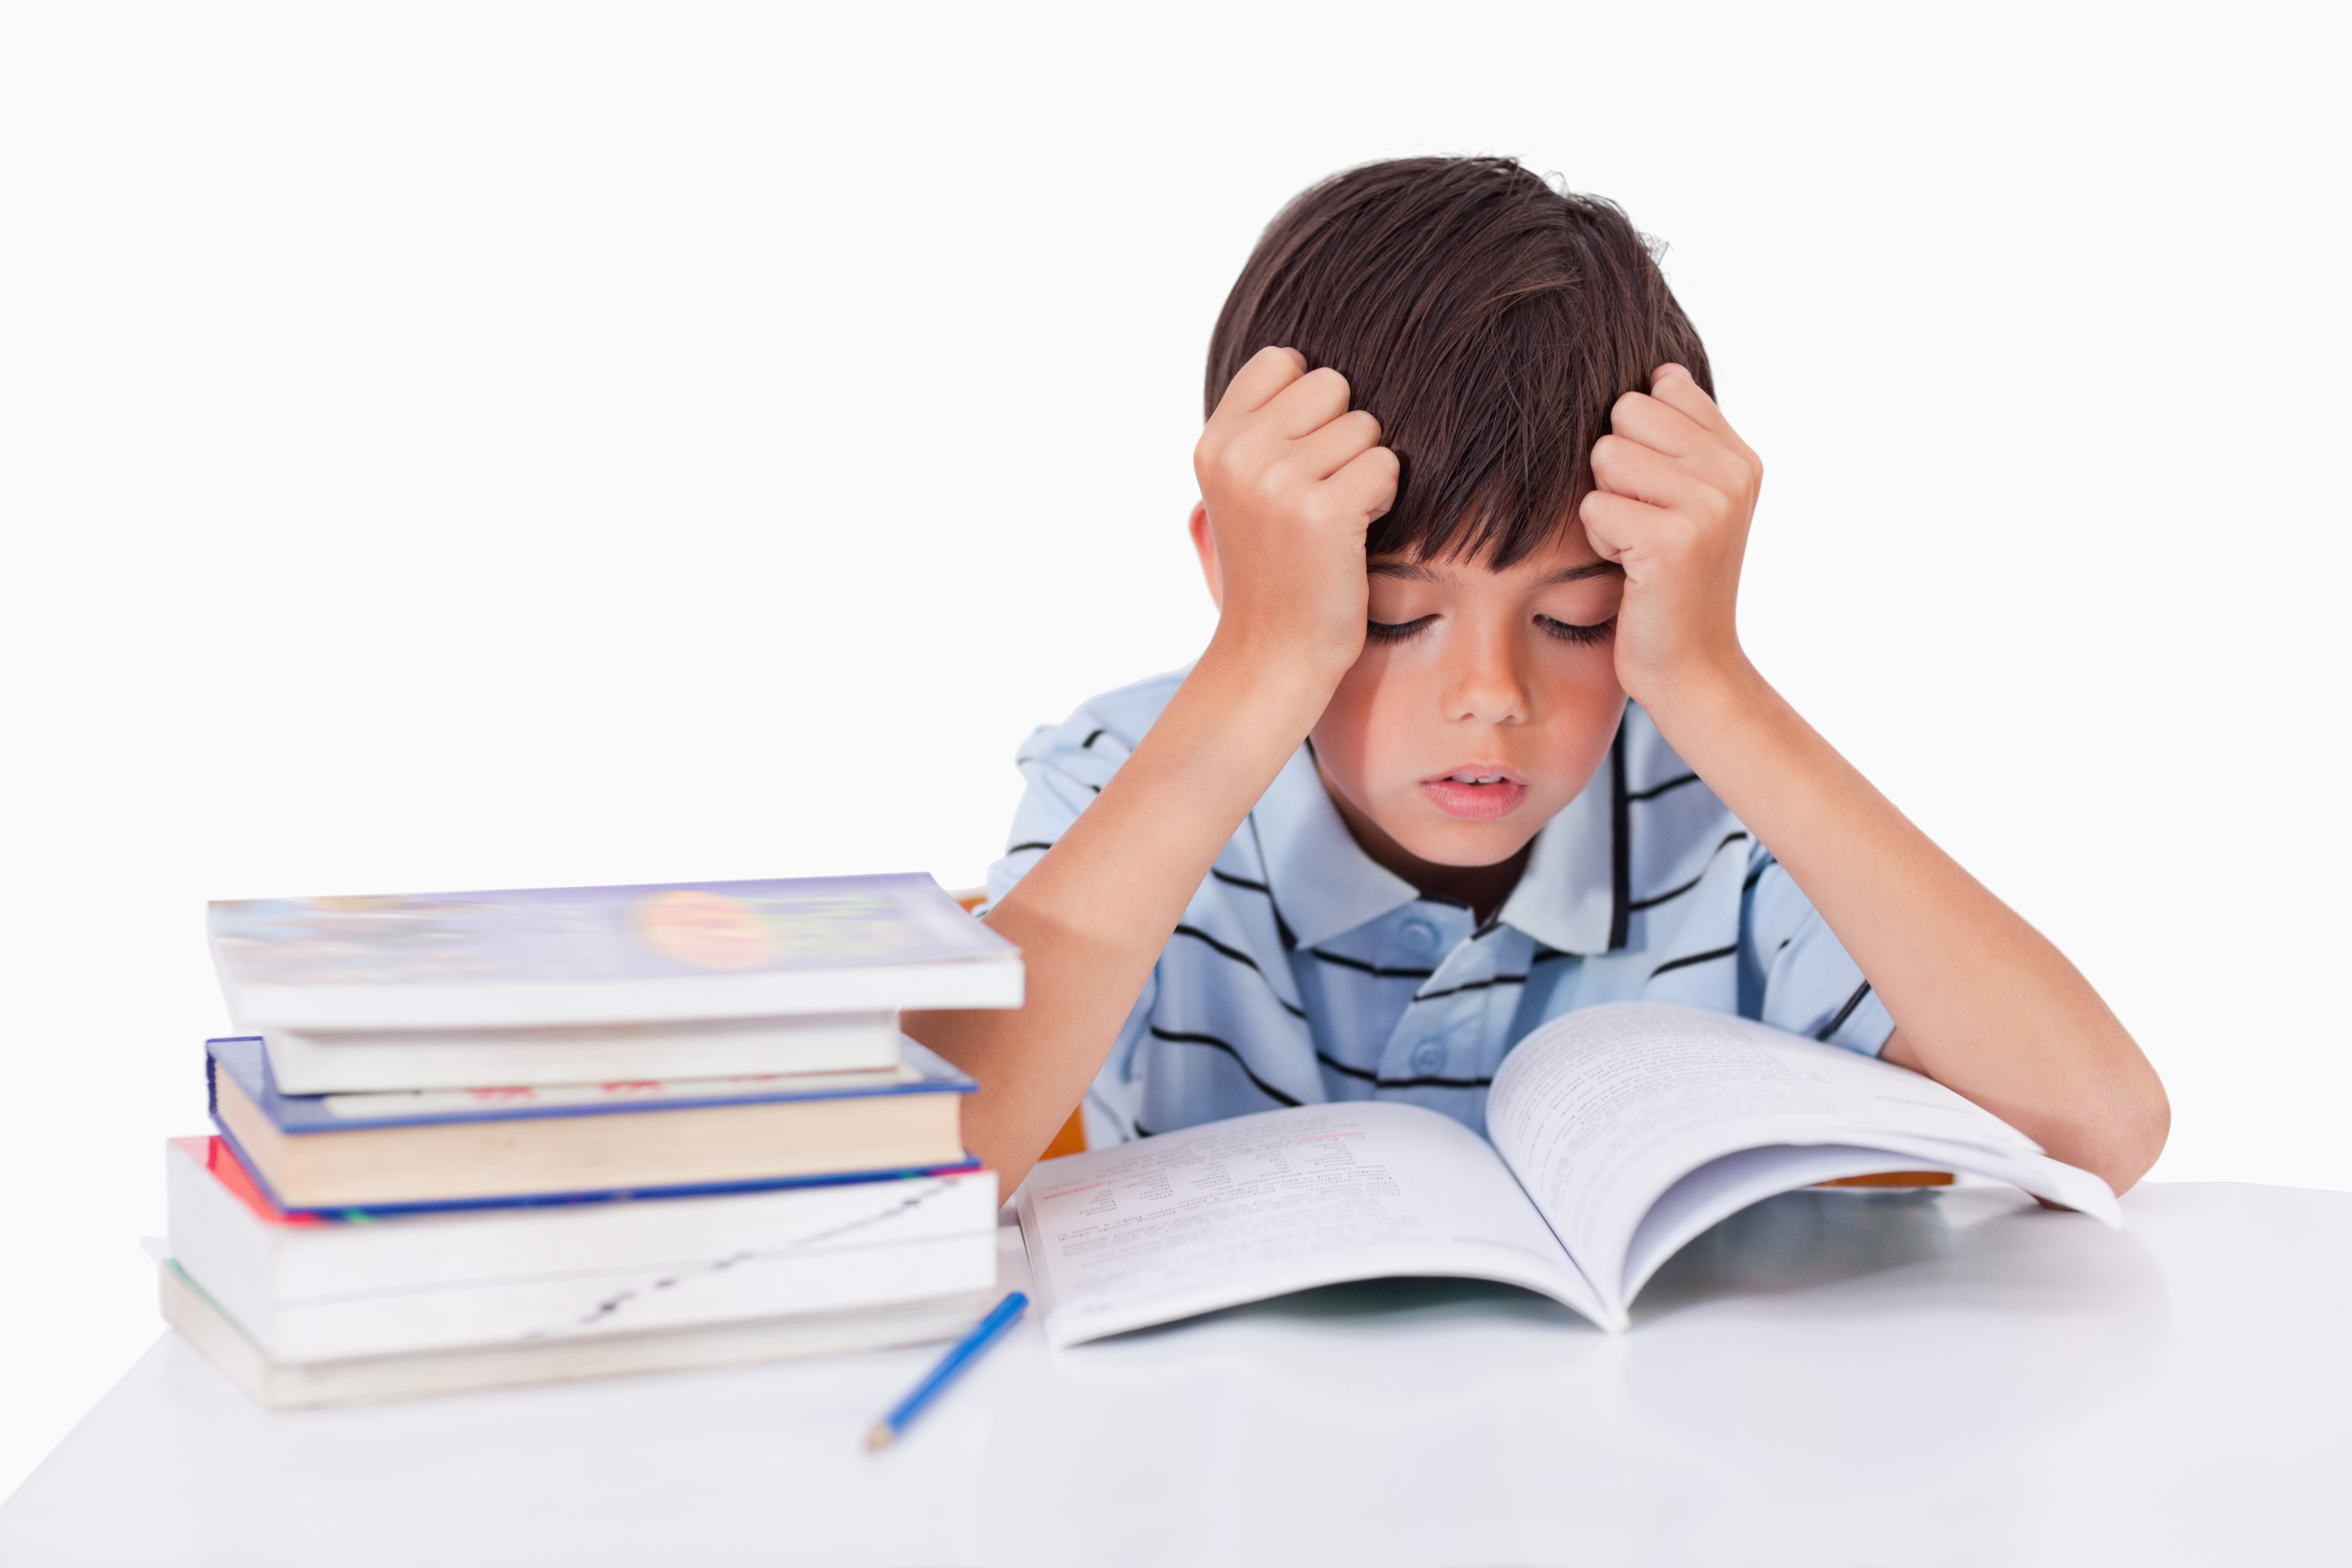 is homework beneficial for students